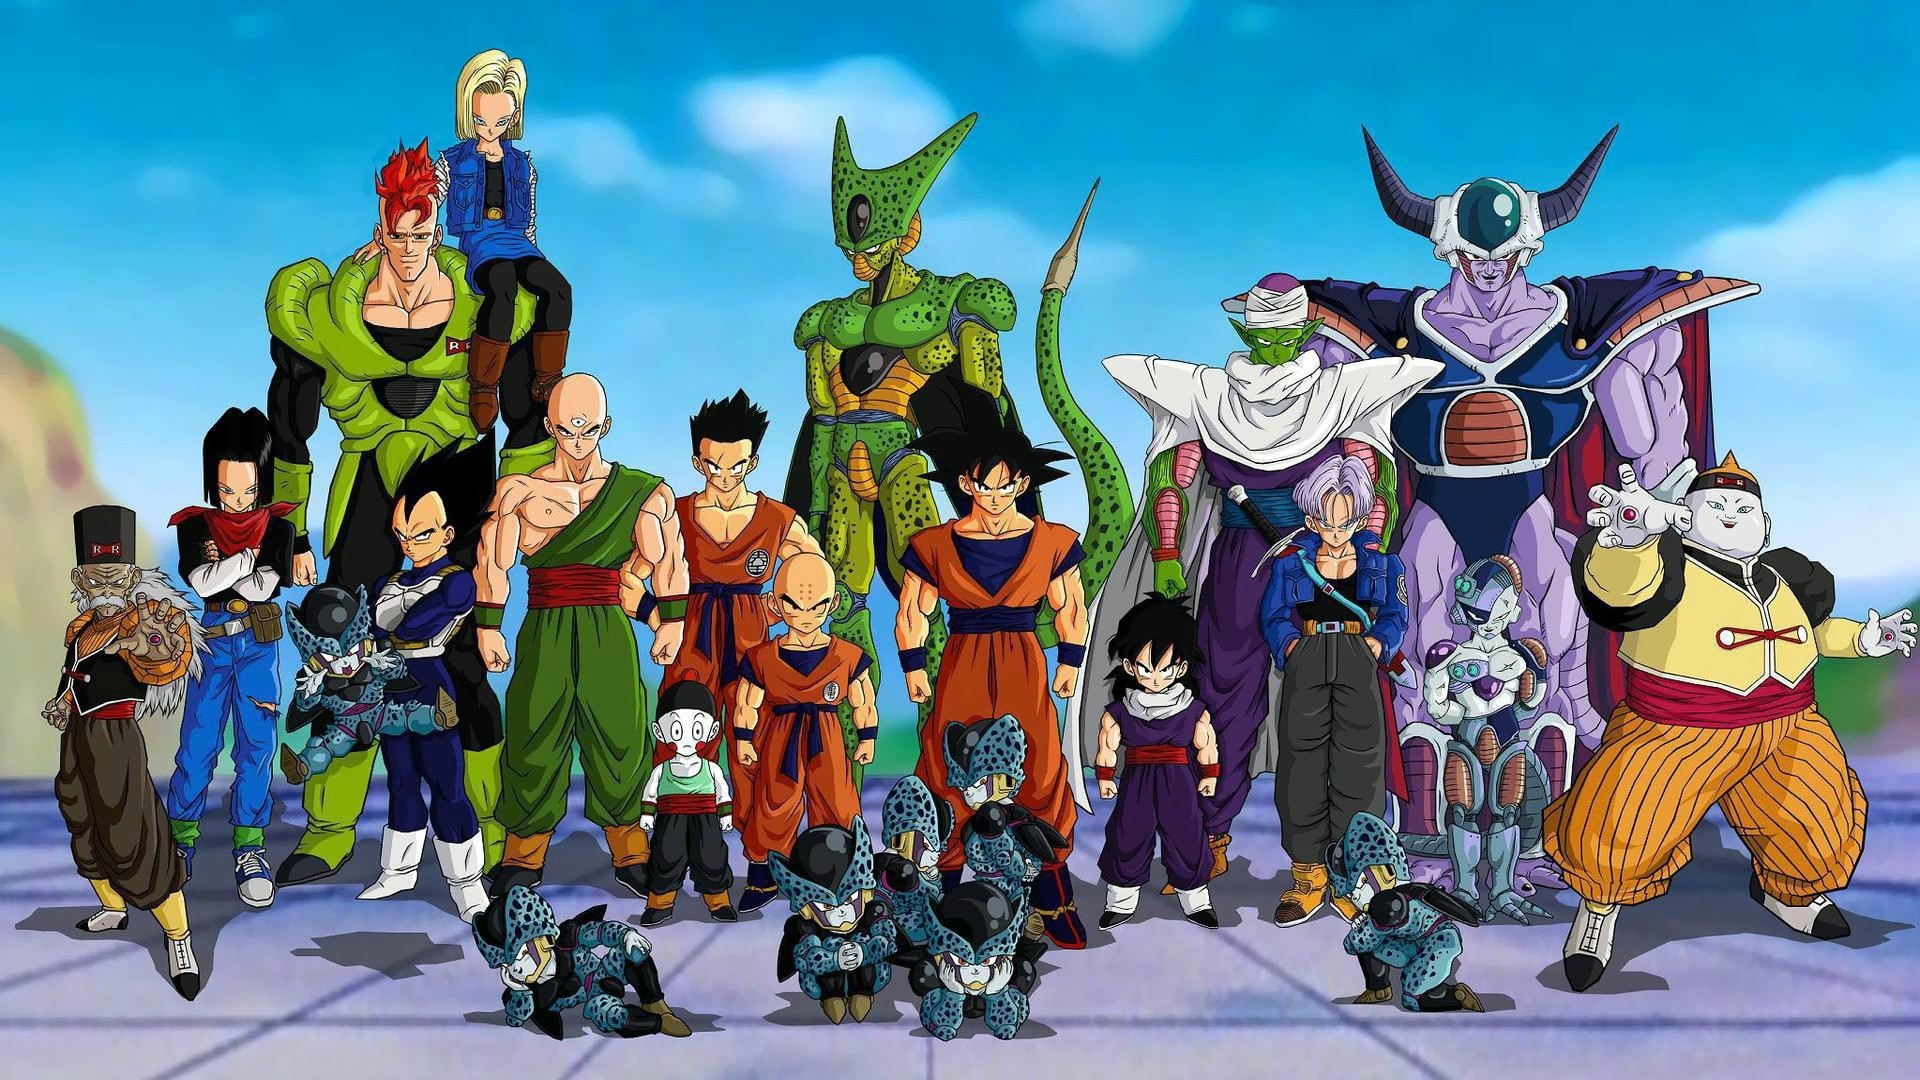 Dragon Ball Cell Character Trunks Character Vegeta Gohan Krillin Android 17 Android 18 Tien Shinhan Dr Gero Android 19 Piccolo Mecha Frieza Chiaotzu Wallpapers Hd Desktop And Mobile Backgrounds